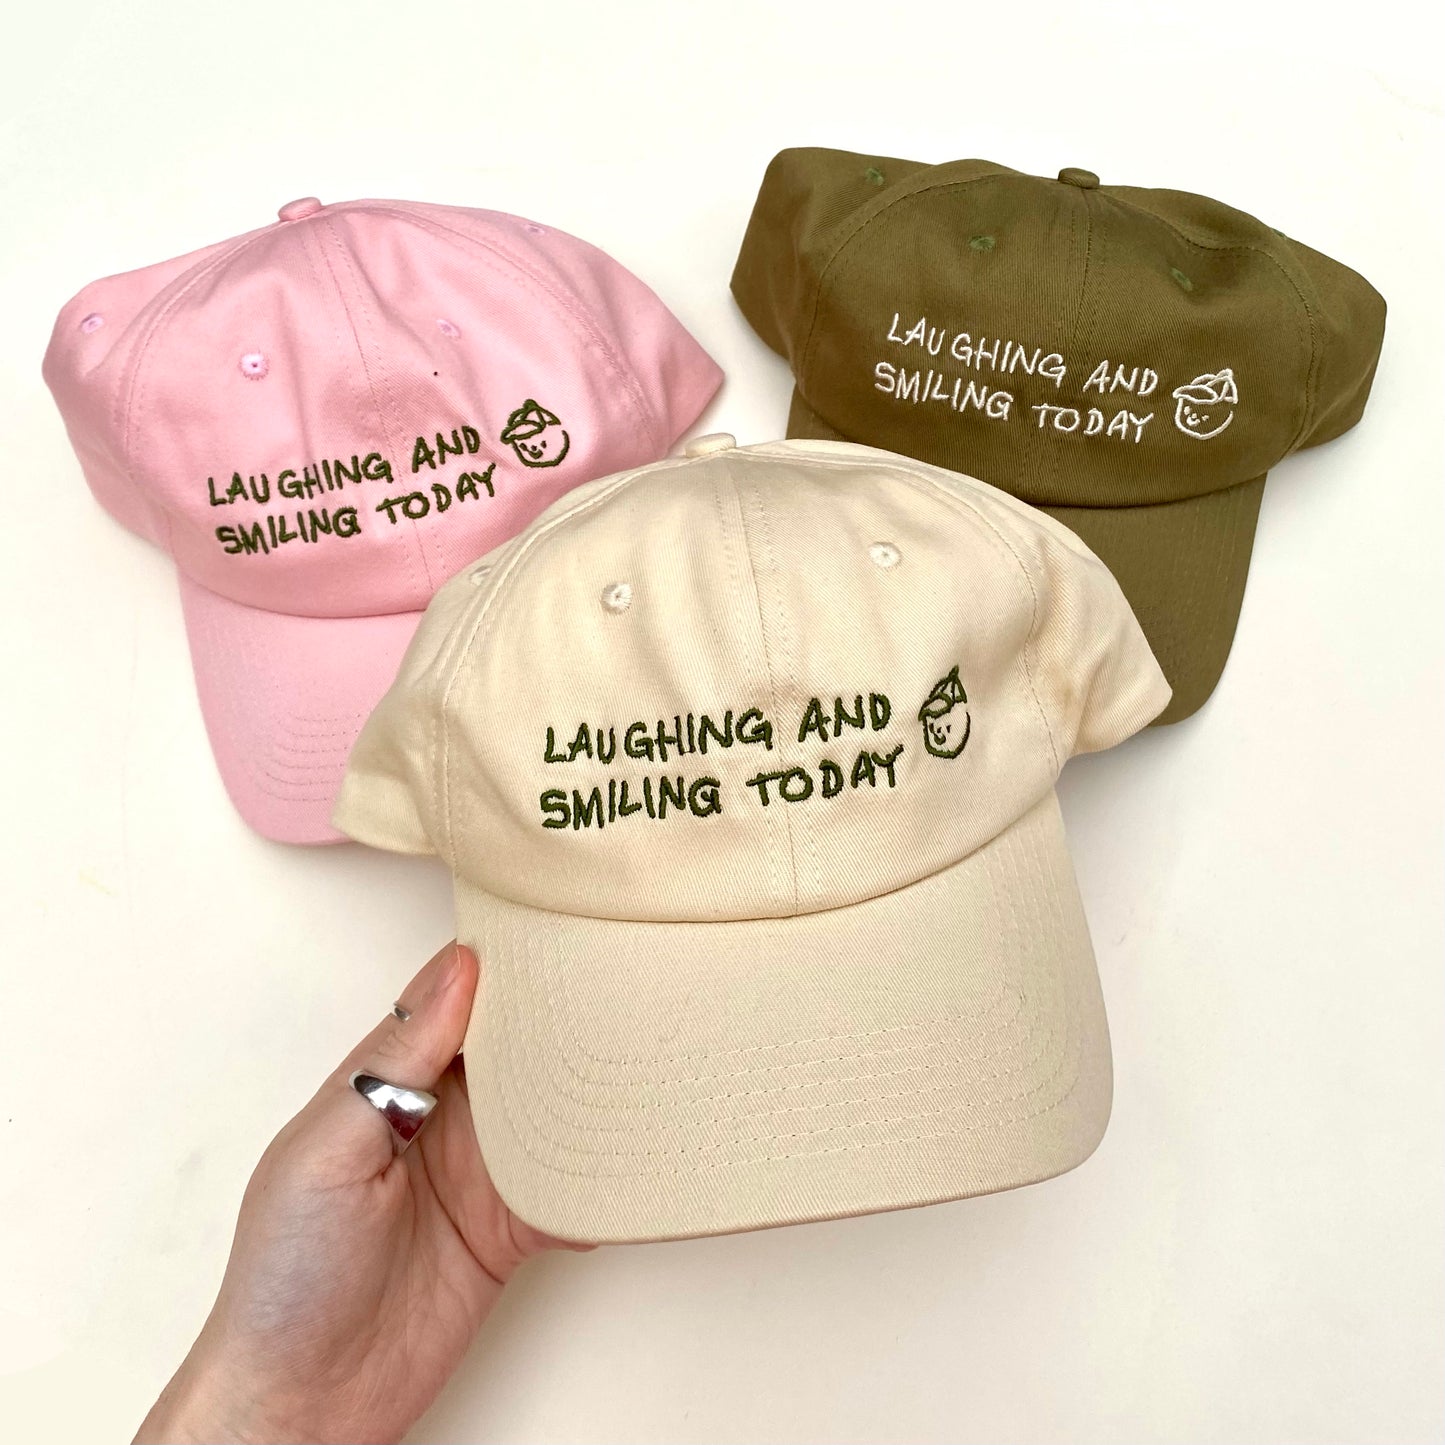 Laughing and Smiling Dad Cap